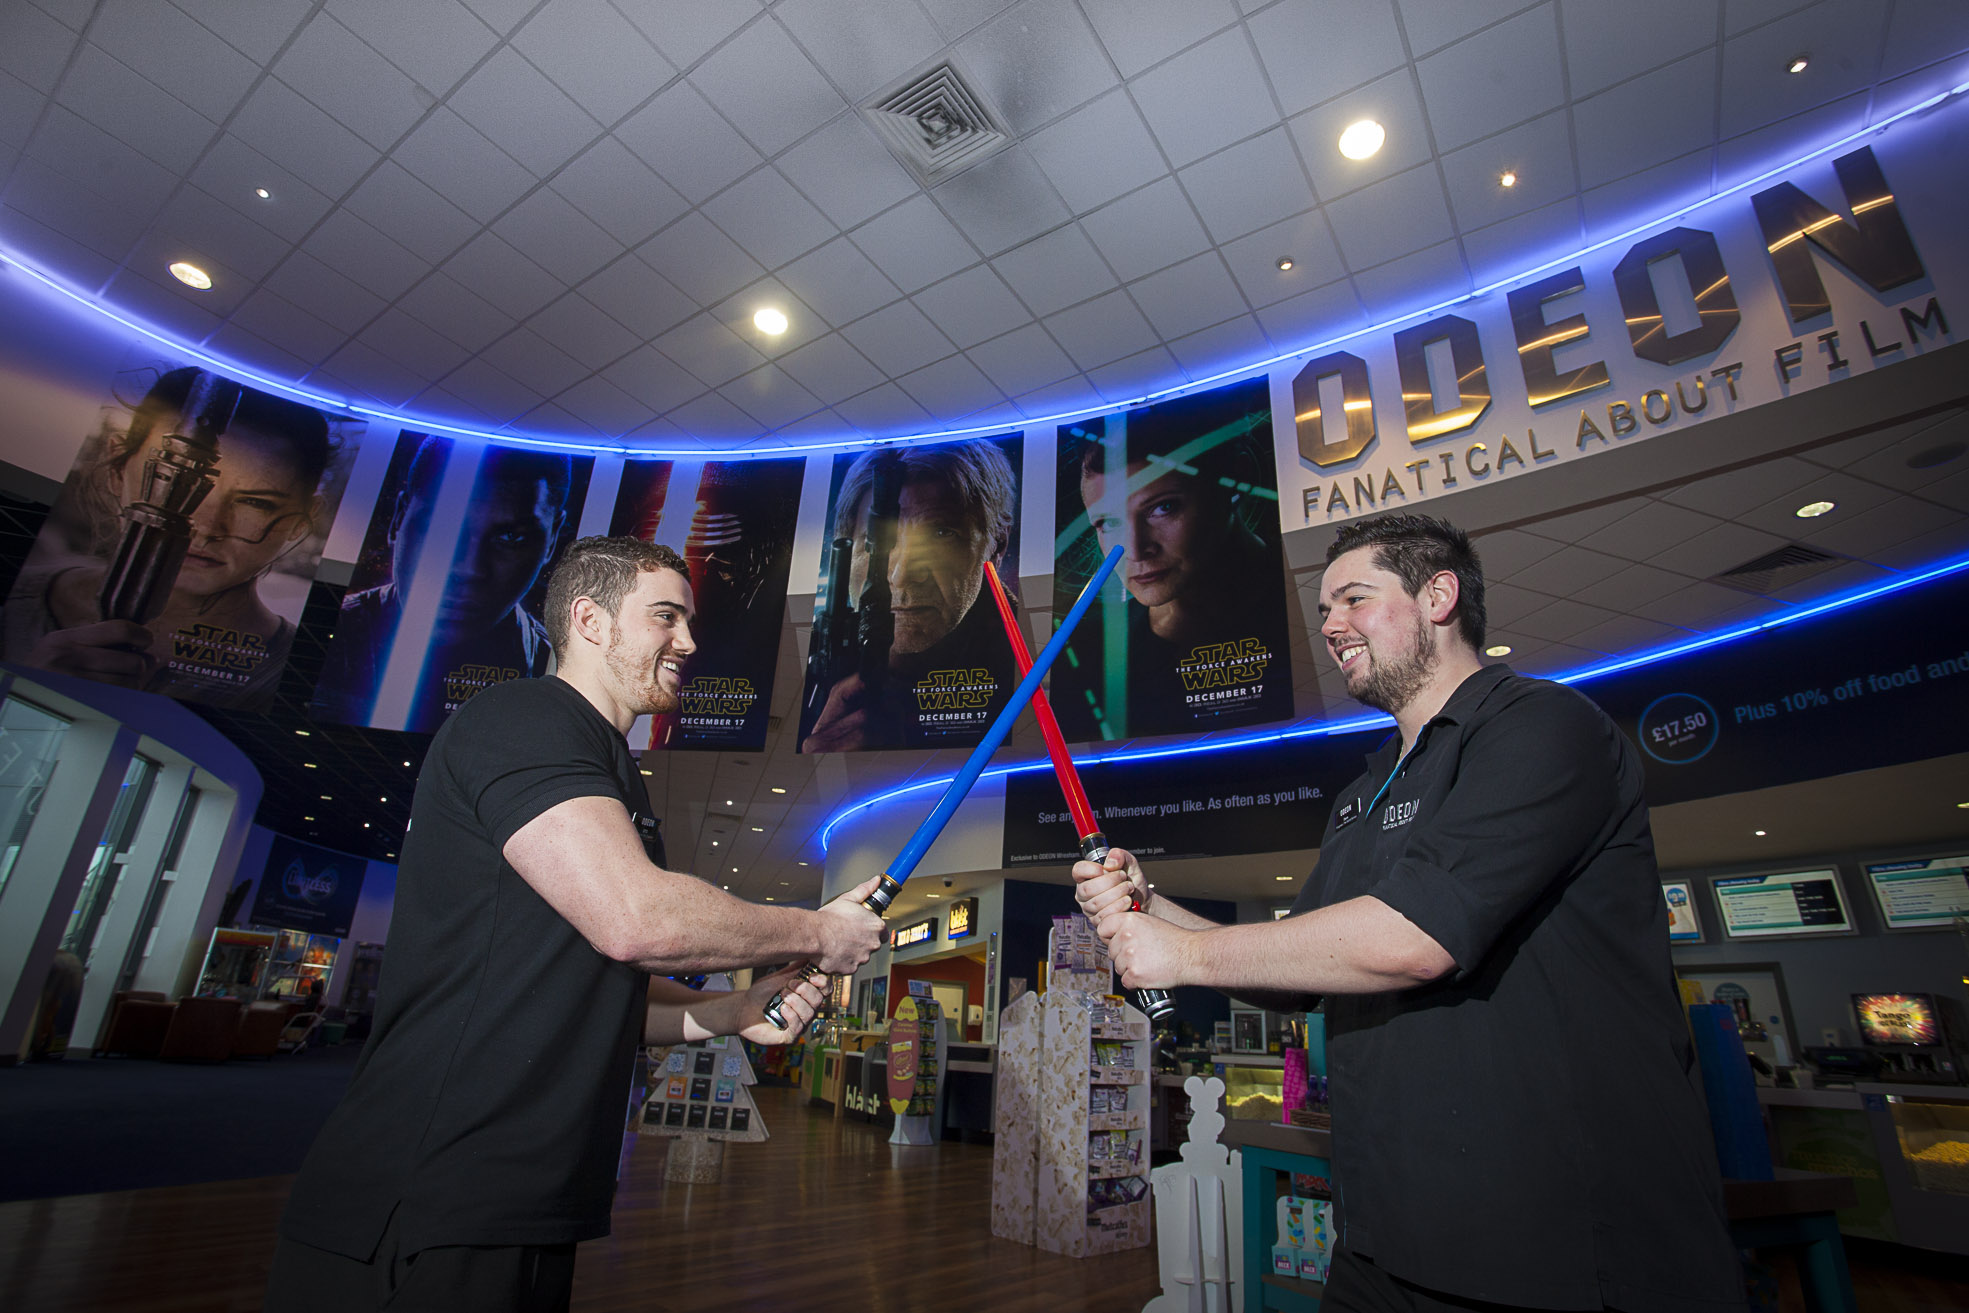 Late Christmas party for cinema staff because of huge Star Wars success